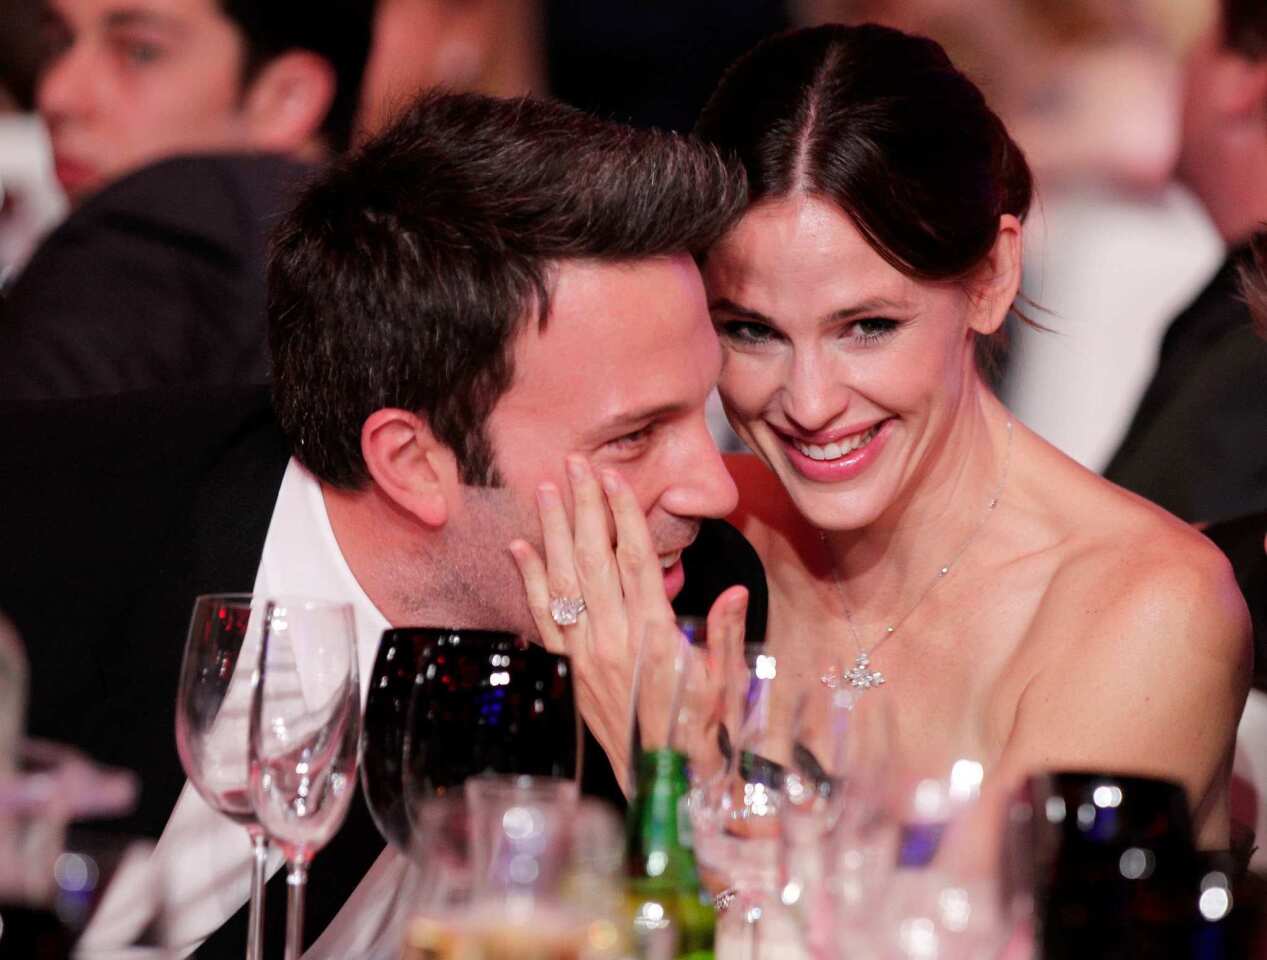 Jennifer Garner and Ben Affleck are the proud parents of a brand new baby boy.The little guy, born in Santa Monica, joins big sisters Violet, 6, and Seraphina, 3. "We are happy to announce on Feb. 27, Jennifer gave birth to a healthy baby boy, Samuel Garner Affleck," new dad Ben said Wednesday on Facebook.